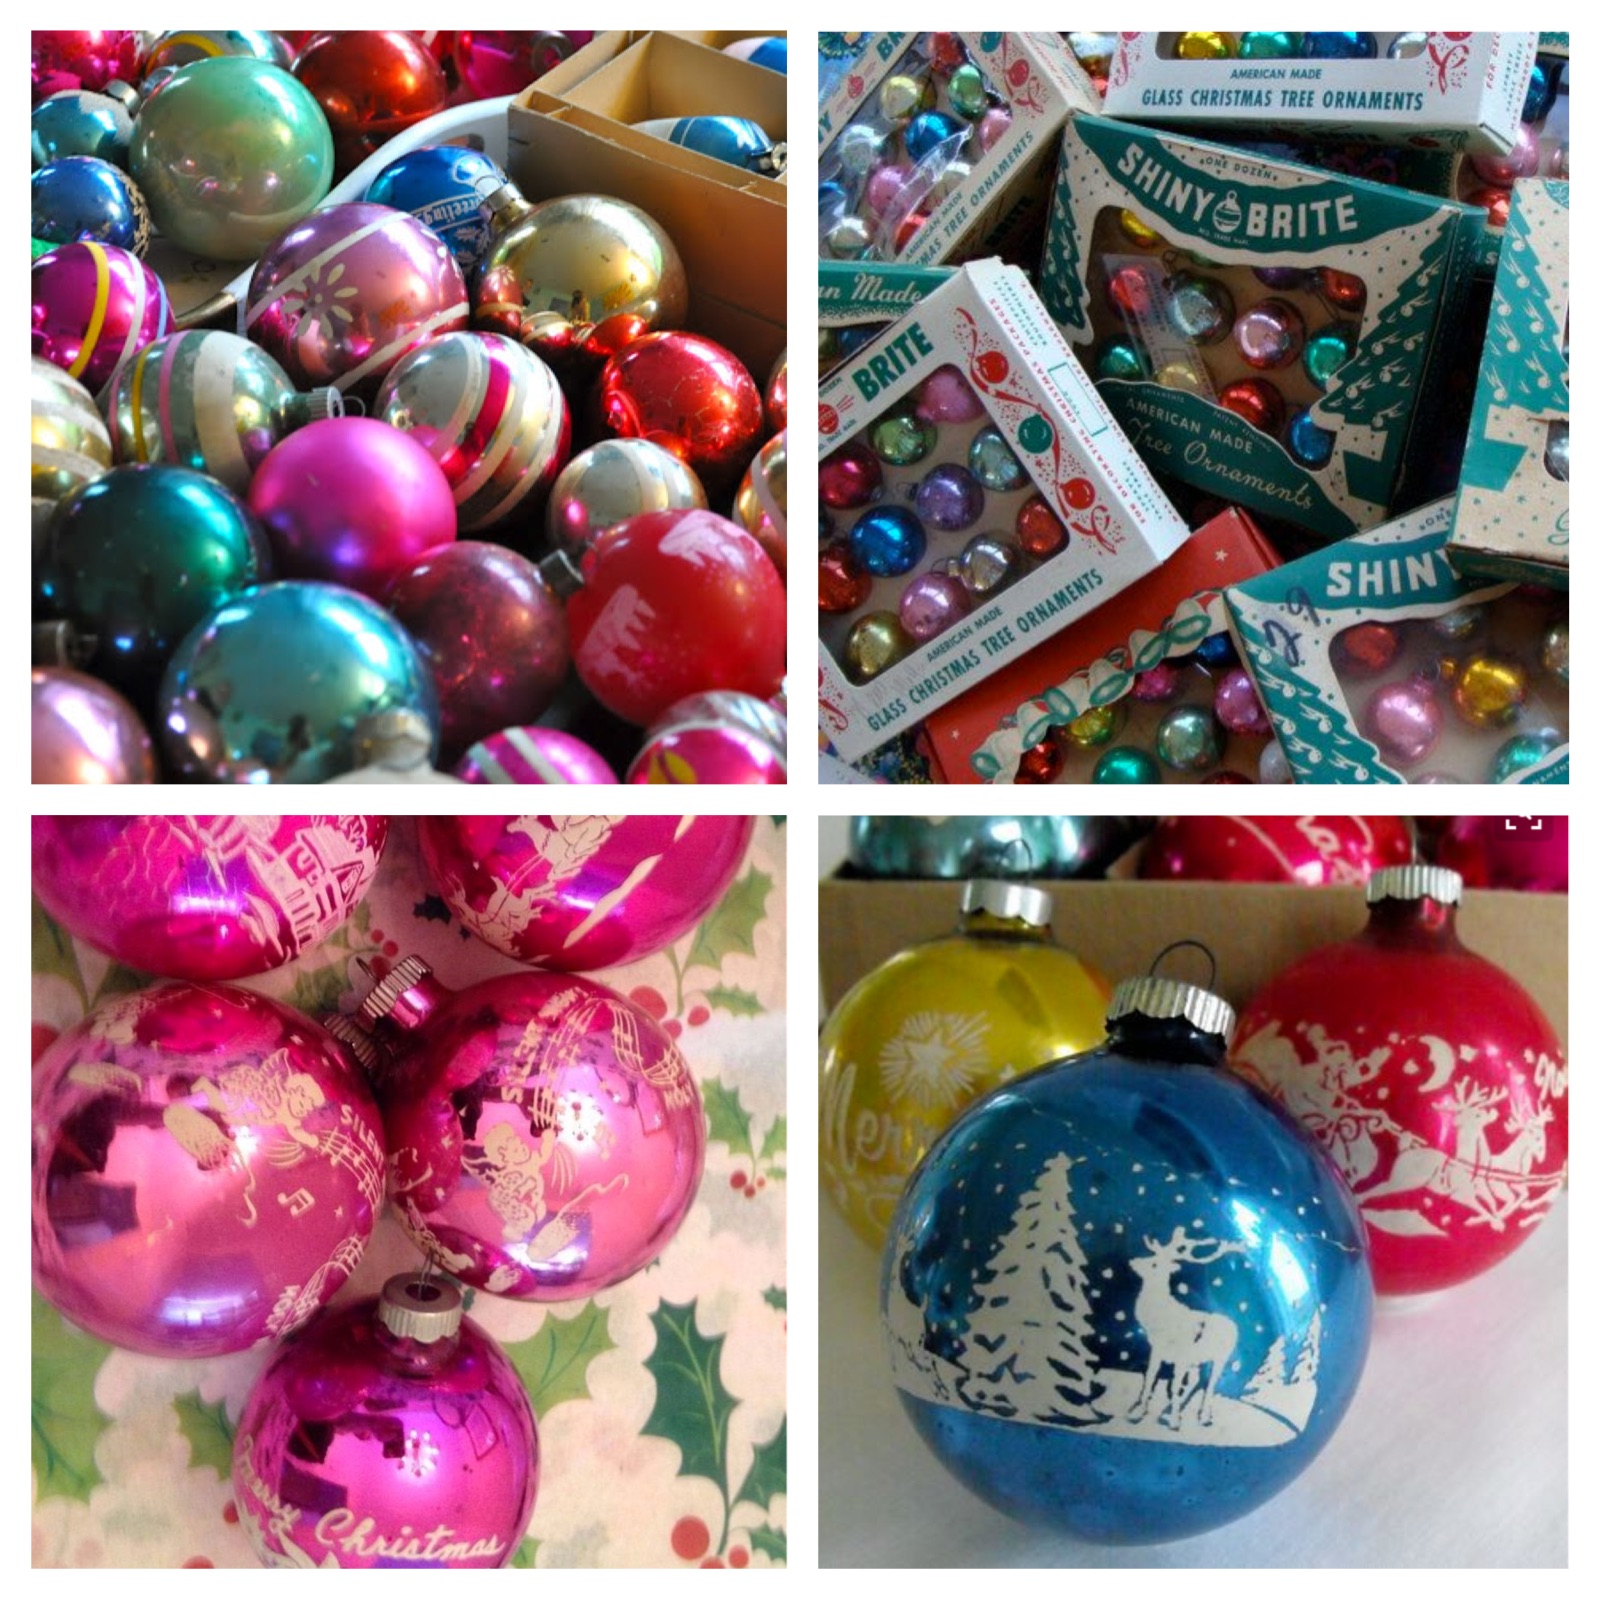 Collecting Vintage Christmas Ornaments